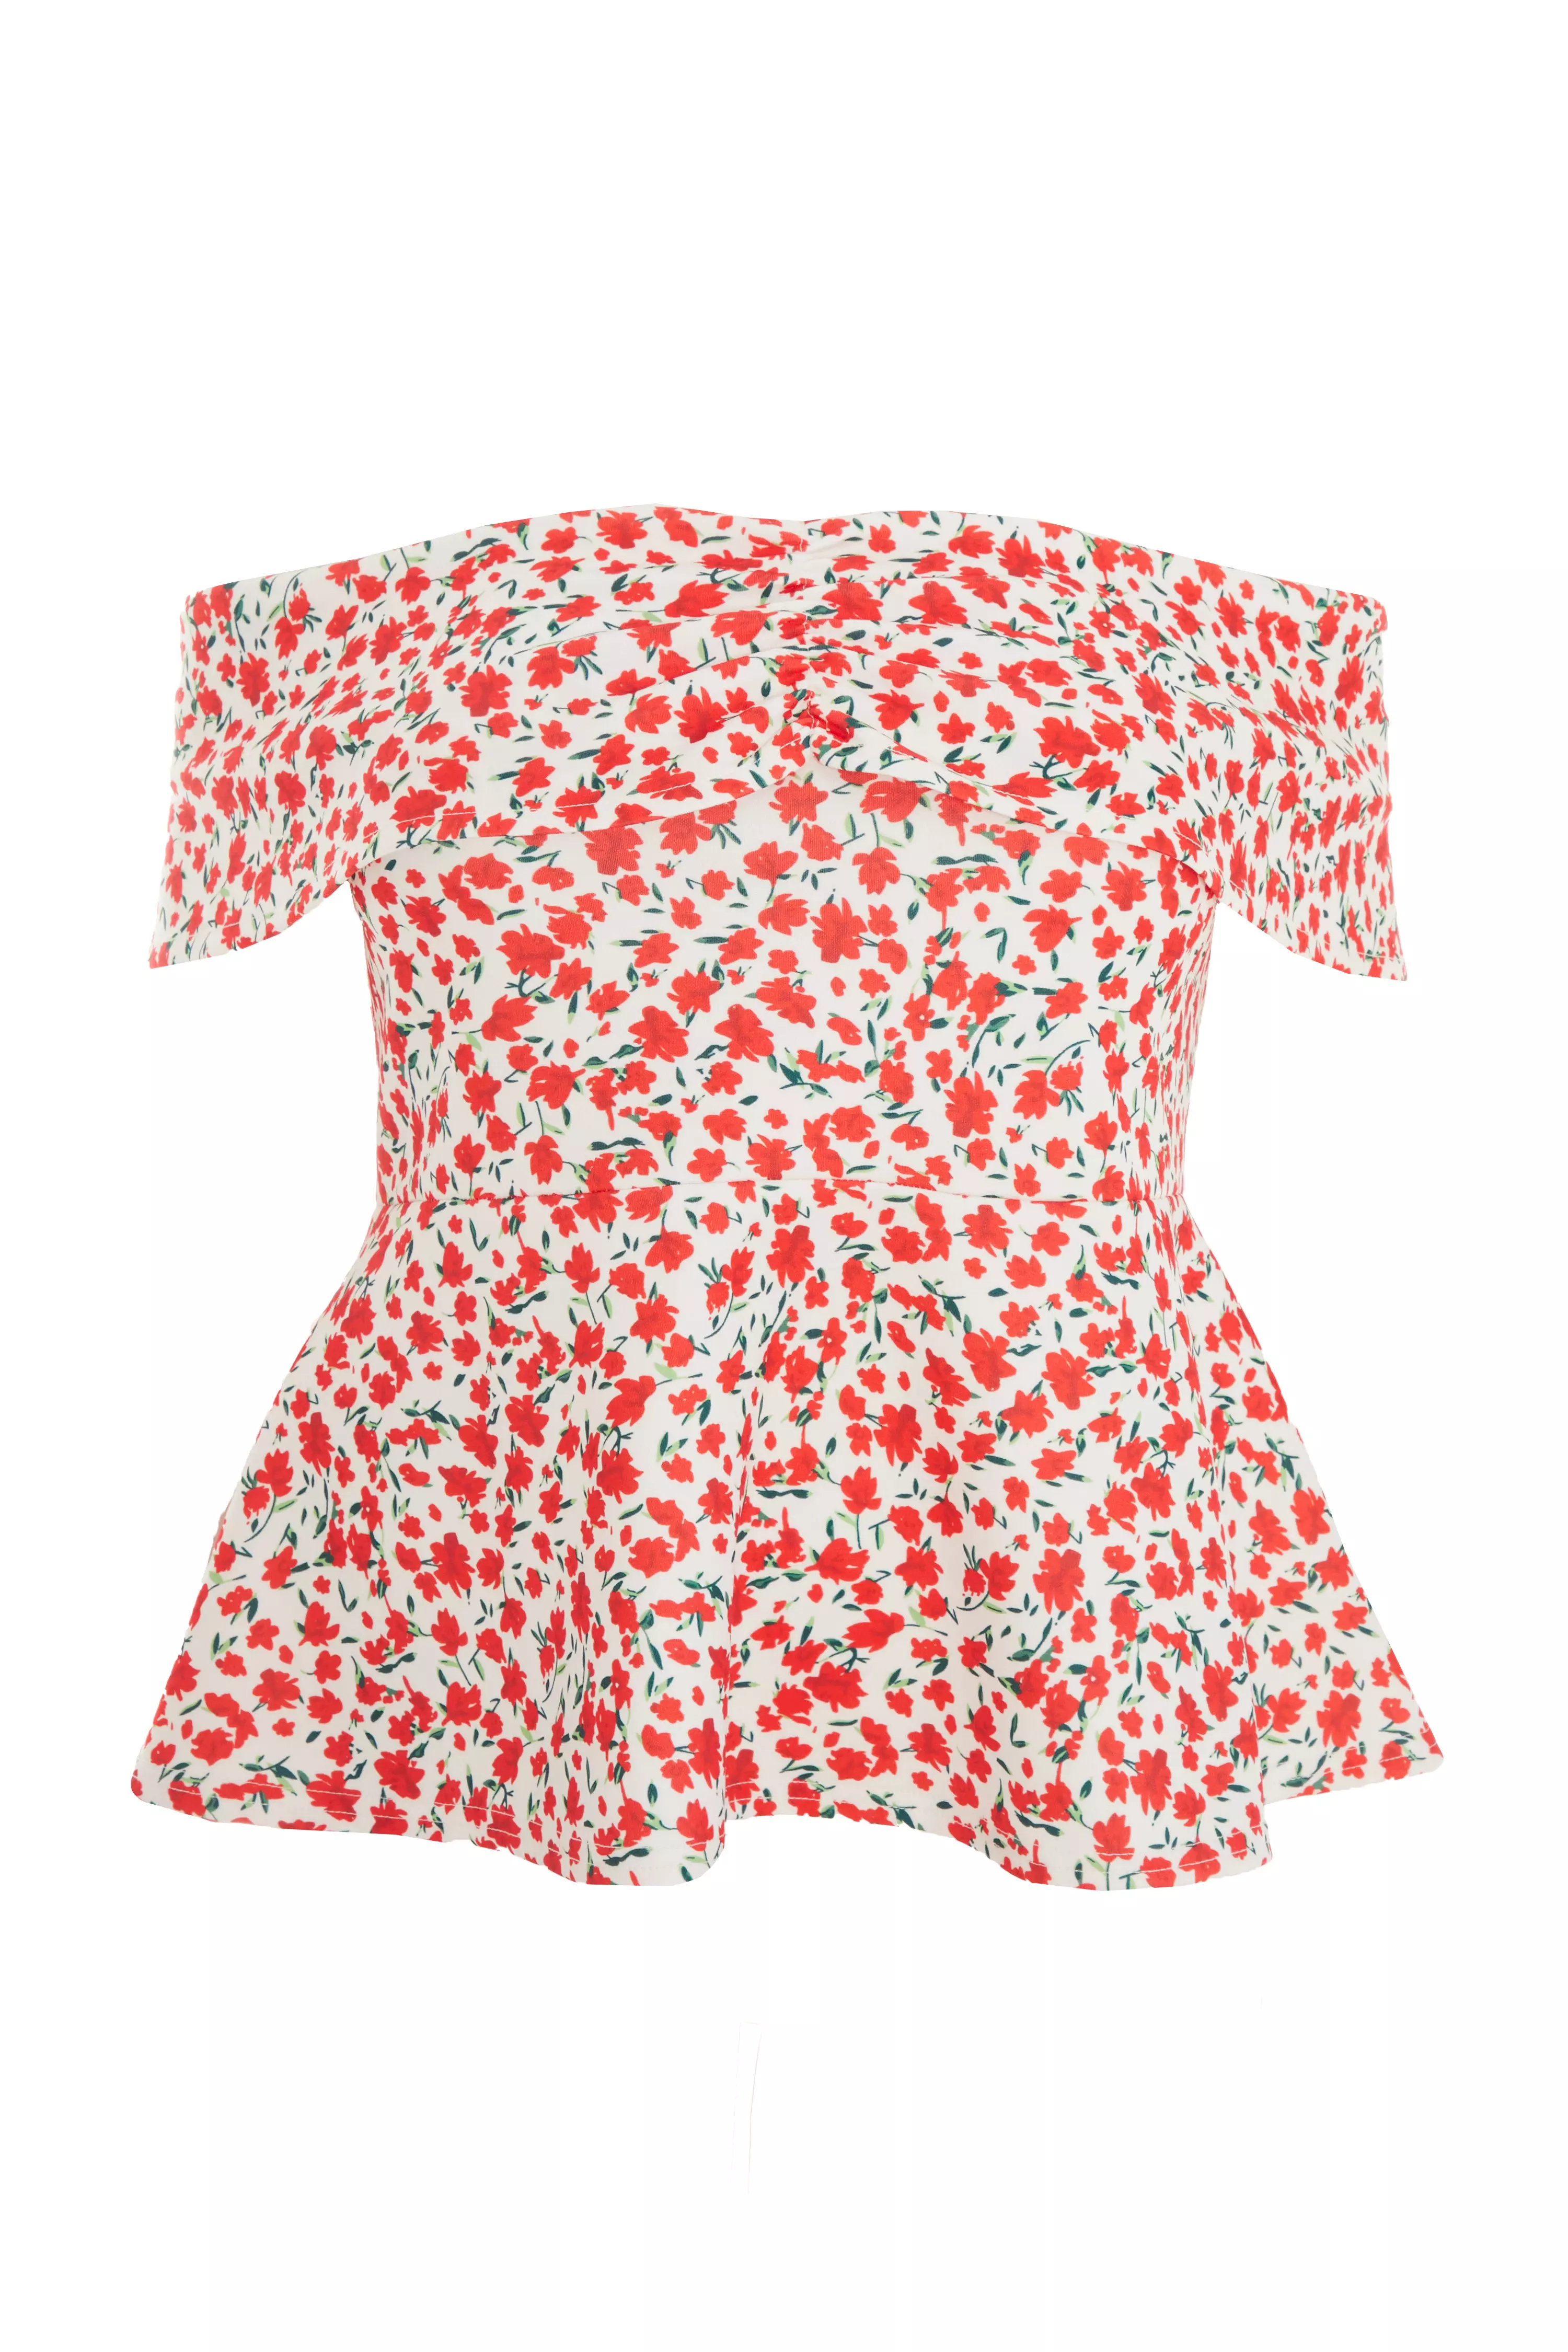 Curve Red Floral Peplum Top